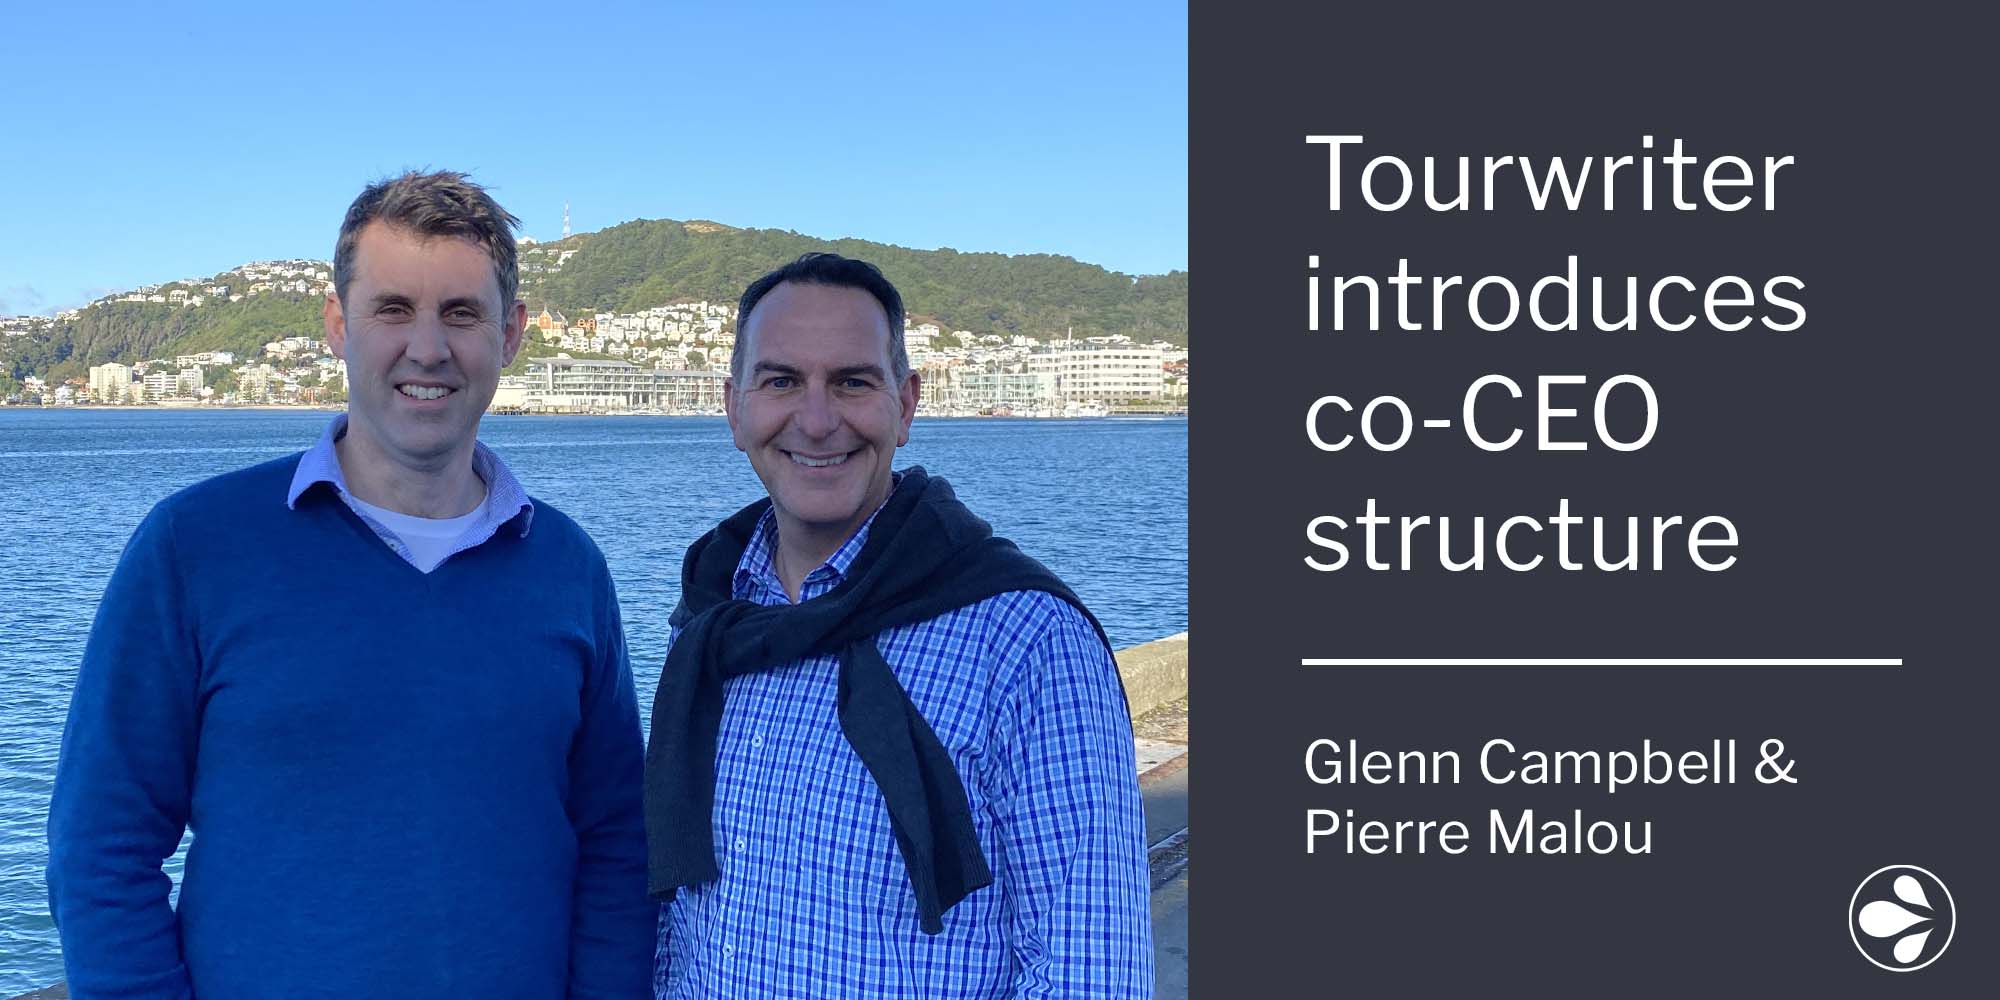 Tourwriter appoints Glenn Campbell and Pierre Malou as co-CEO’s to lead the company towards further growth